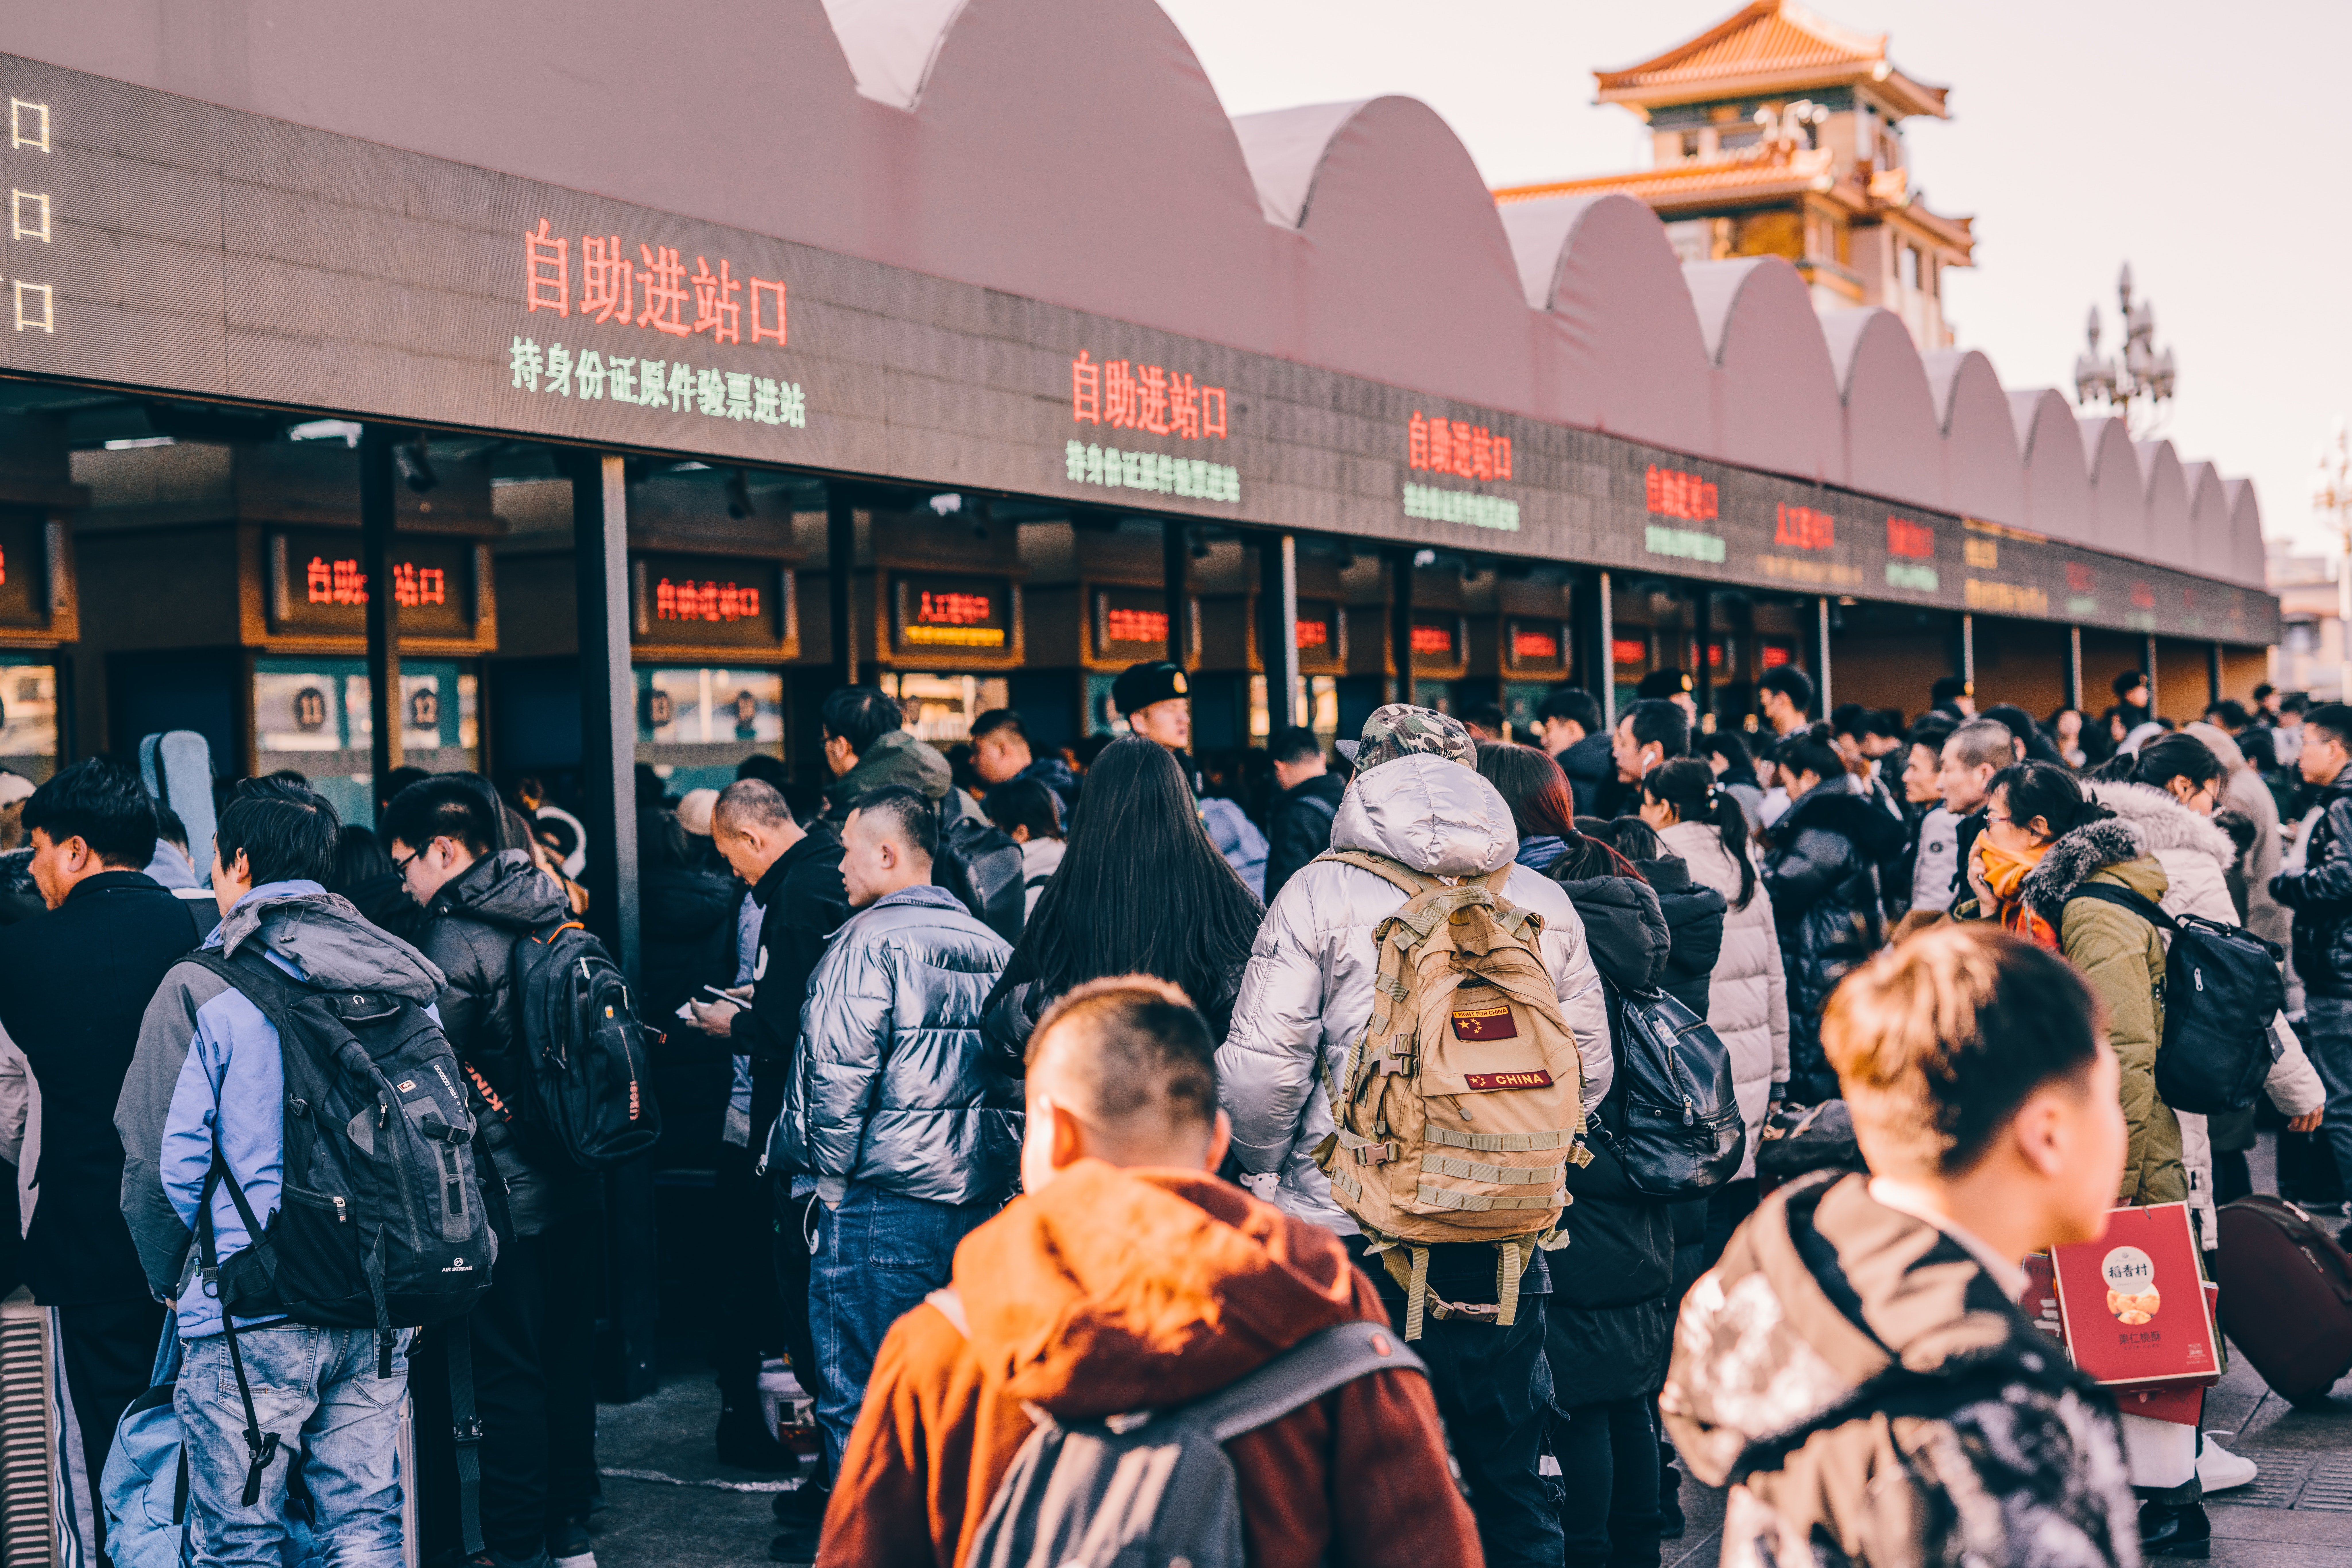 A group of people on a queue | Photo: Pexels